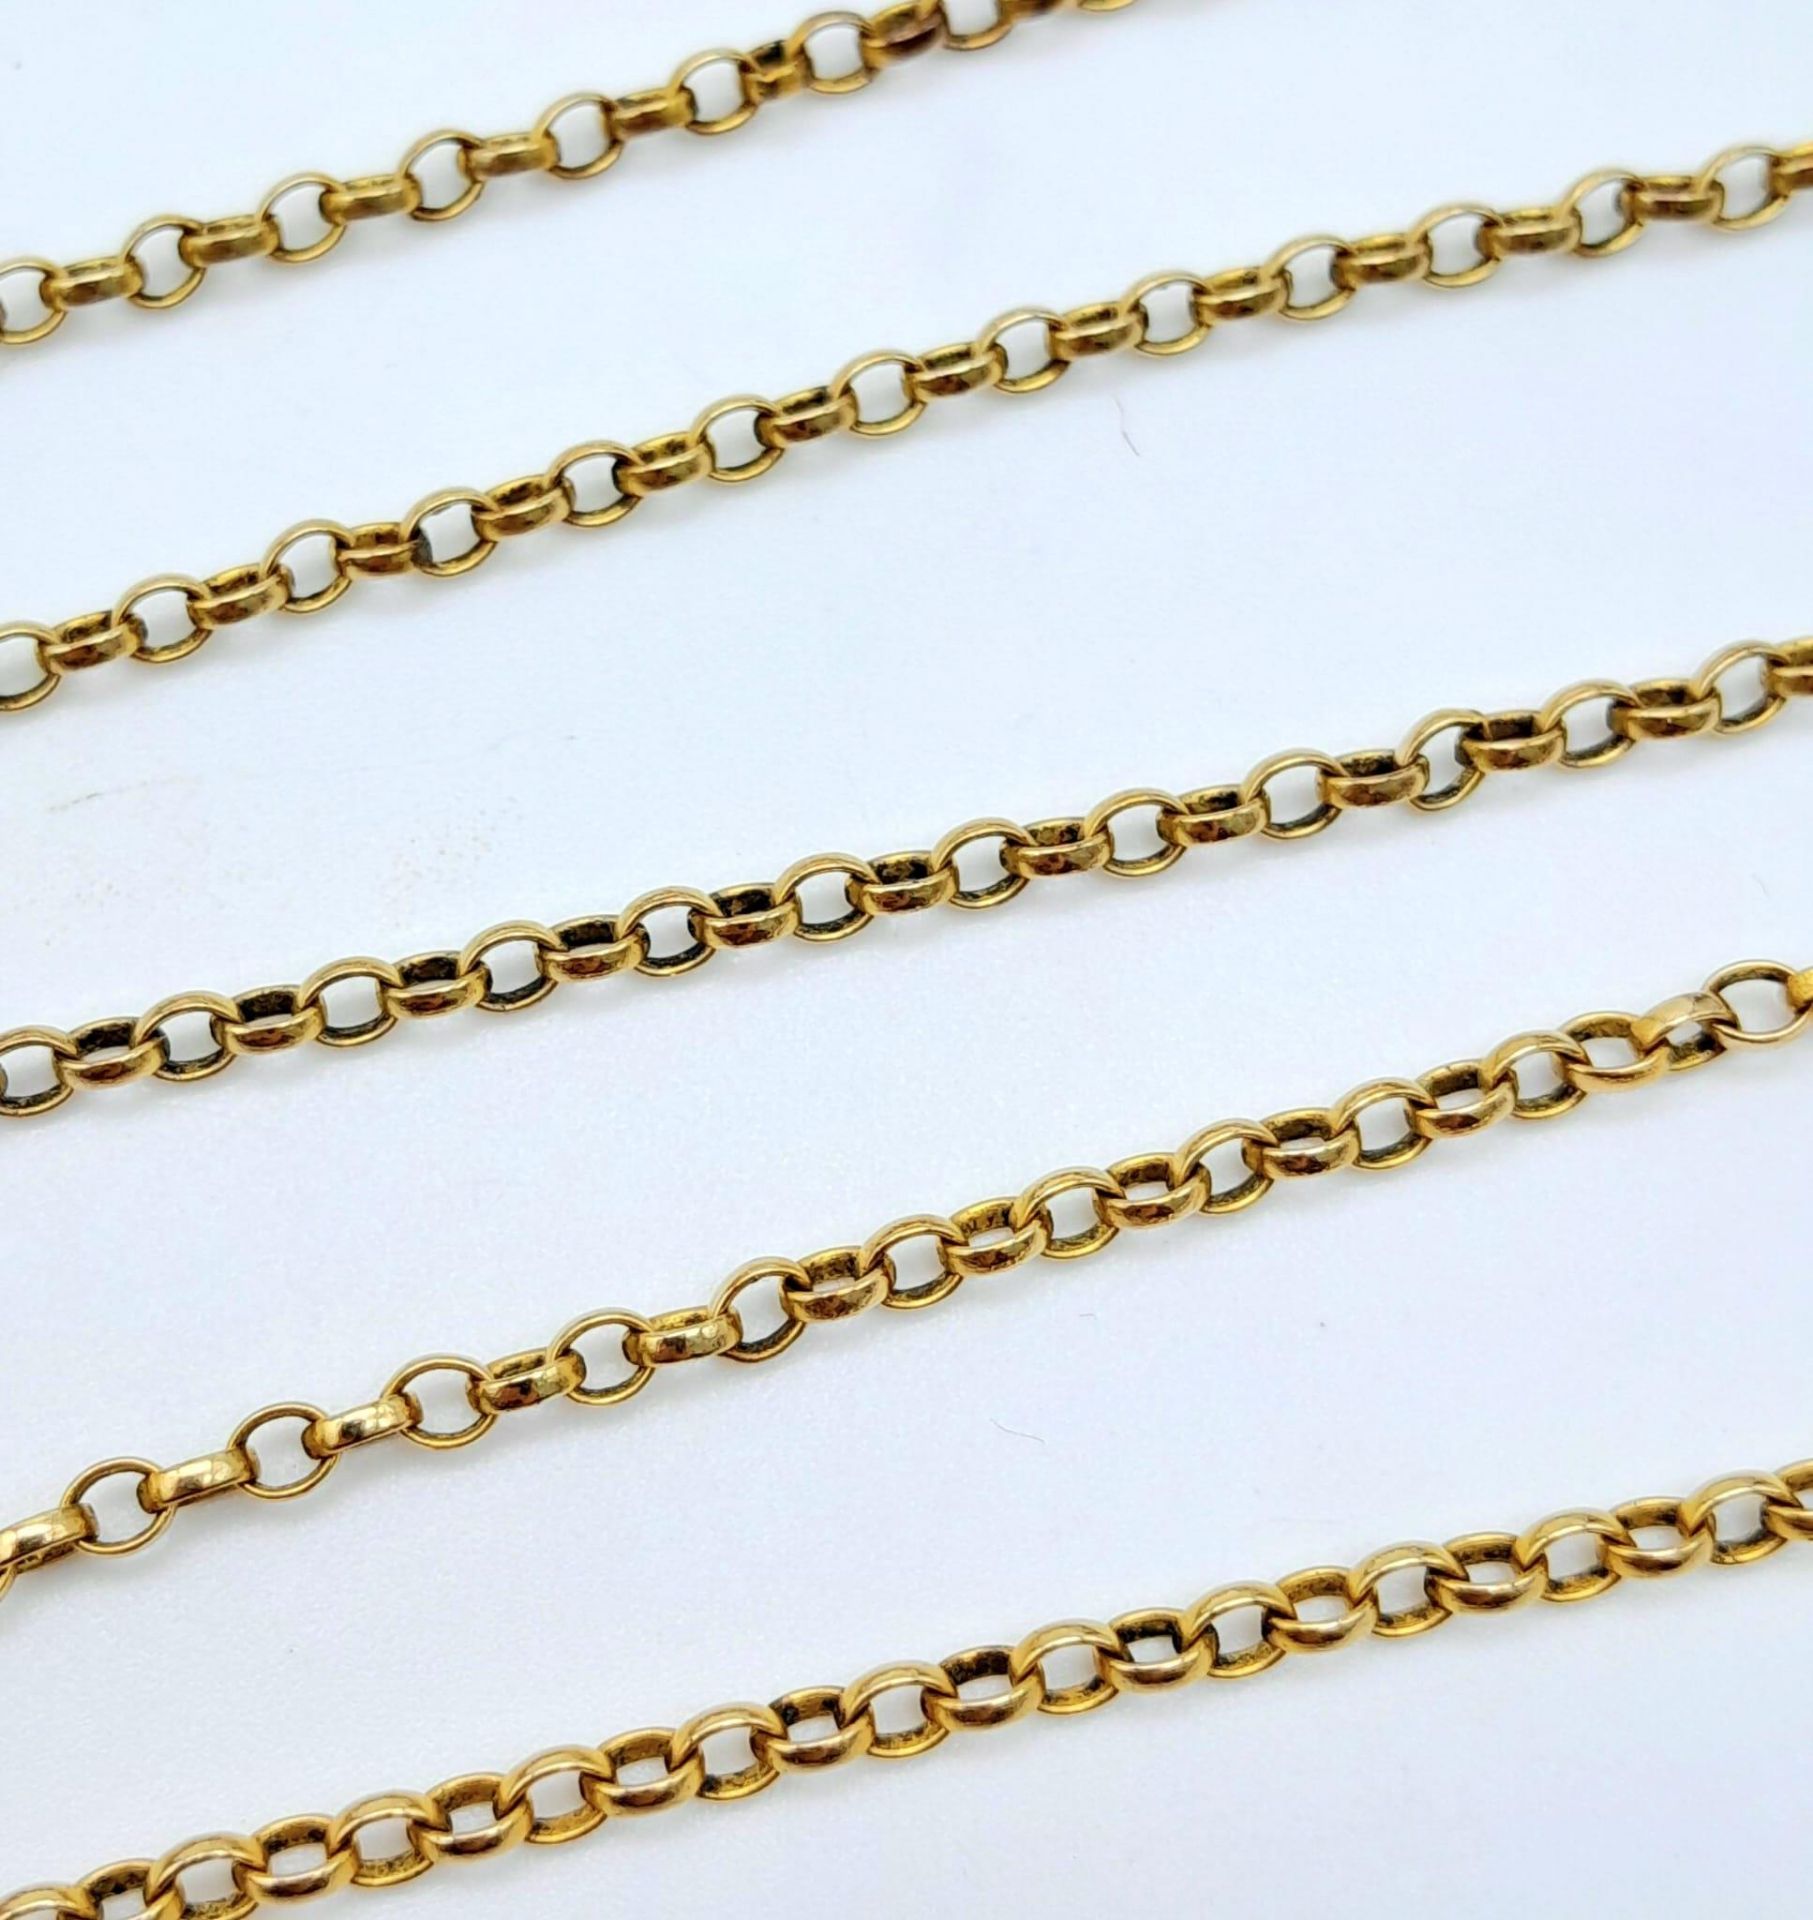 A 9 K yellow gold chain necklace, length: 56 cm, weight: 7.2 g. - Image 4 of 4